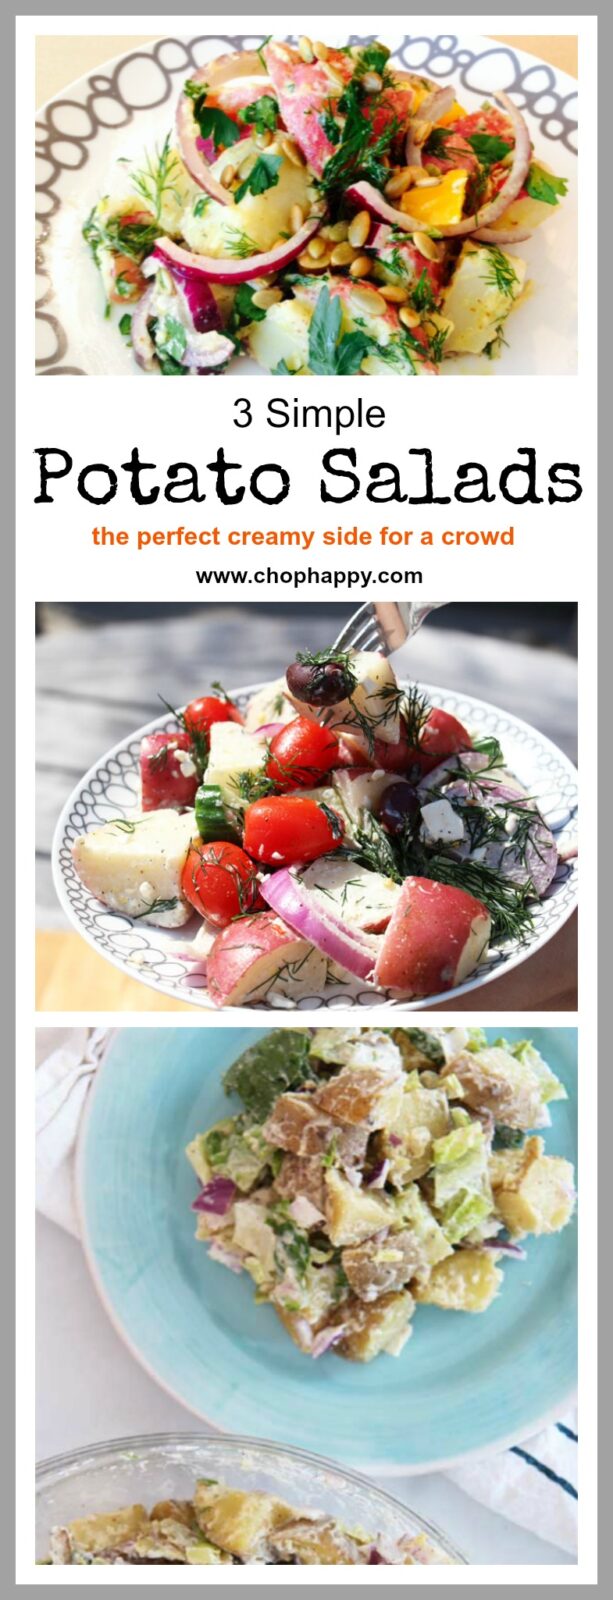 3 Amazingly Easy Potato Salad Recipes- All of them are a family favorite that makes smiles happen instantly. 1. Caesar Potato Salad, 2. Greek Potato Salad, and 3. Dijon Potato Salad. All 3 are make-ahead awesome. l www.ChopHappy.com 